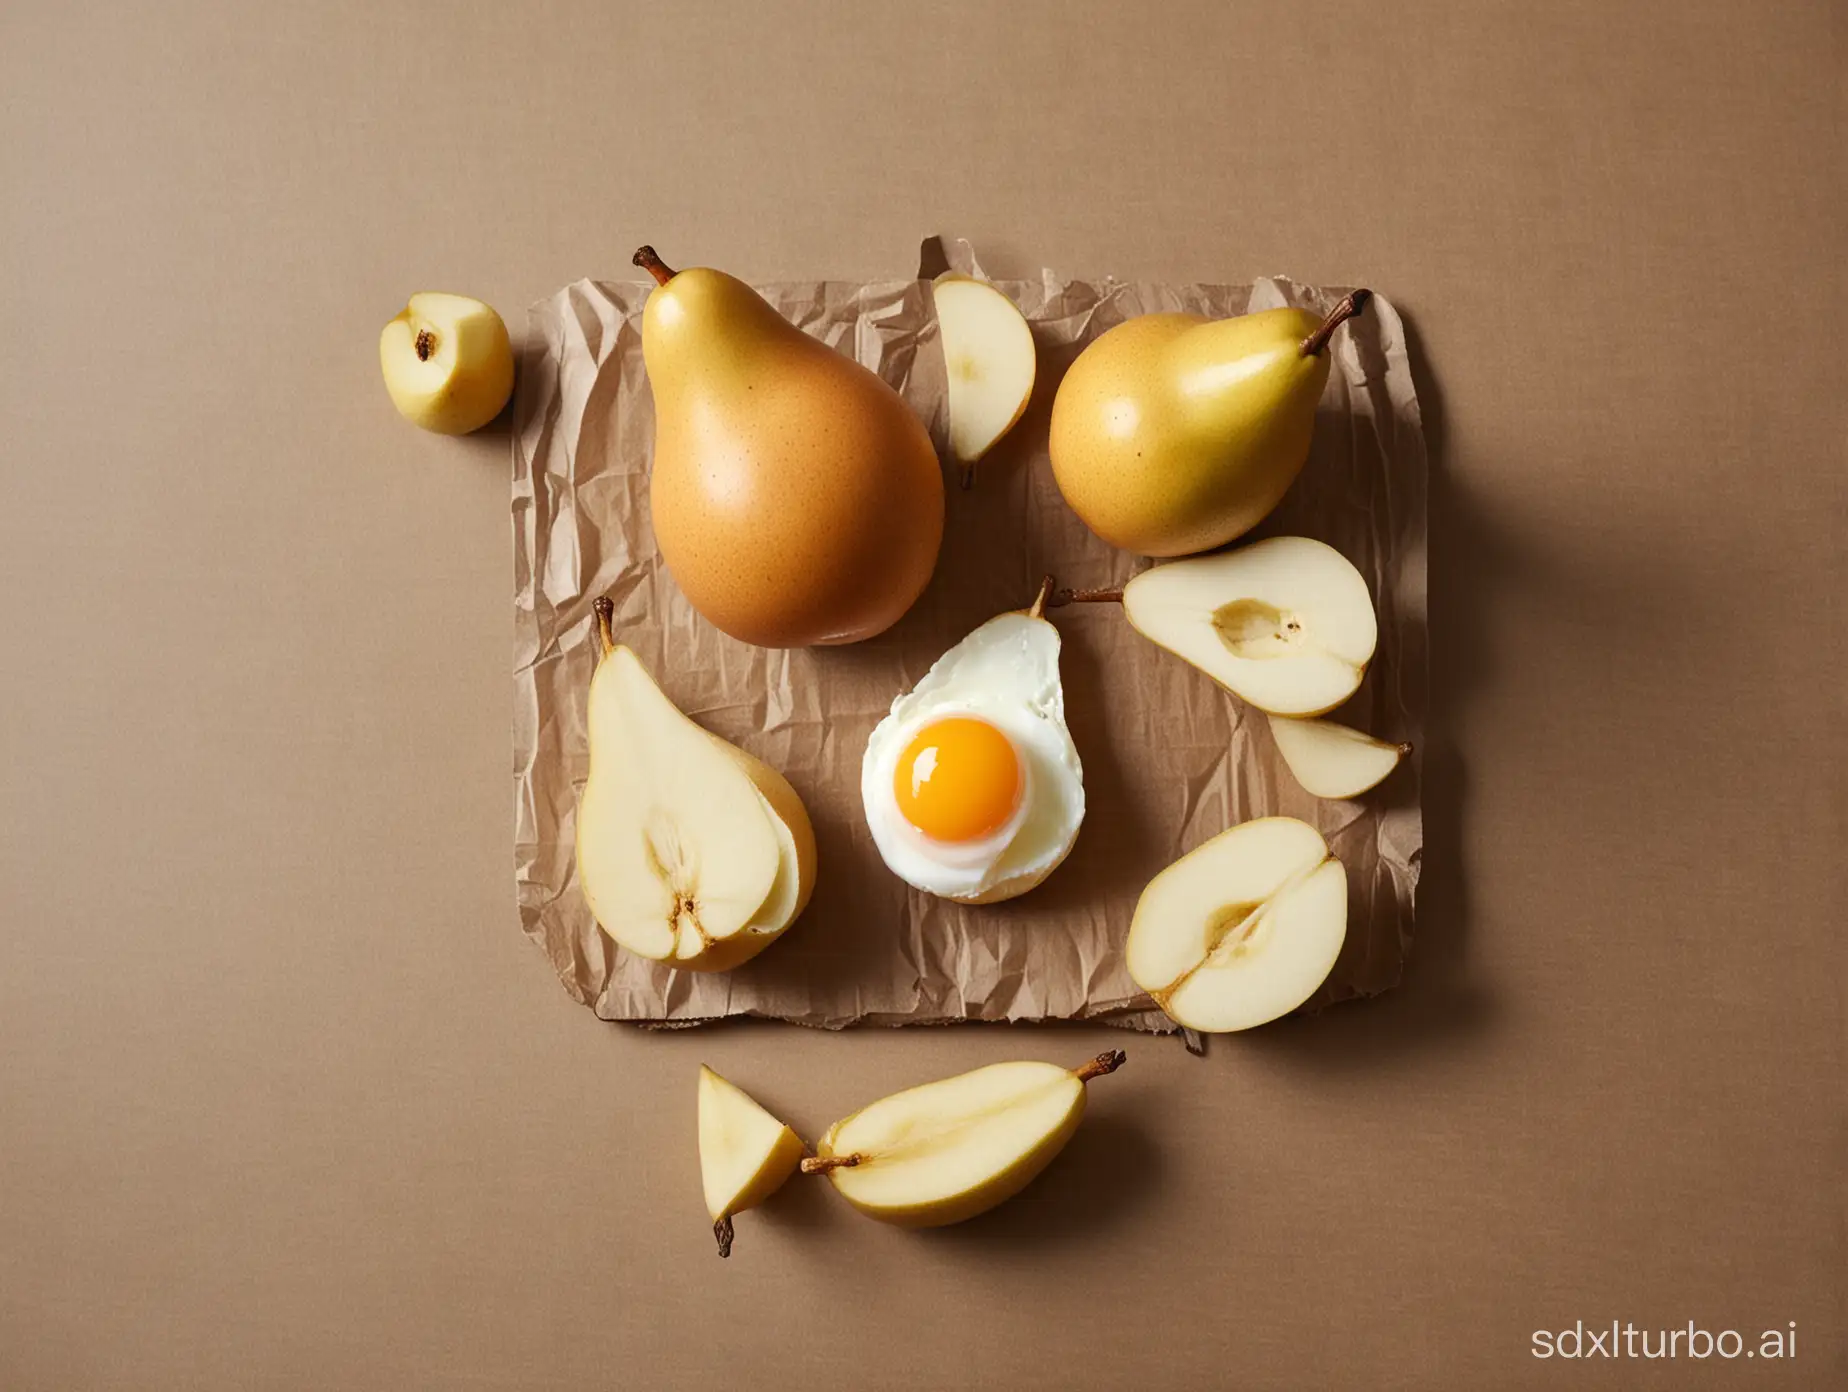 Eggs and pears combine to form an object